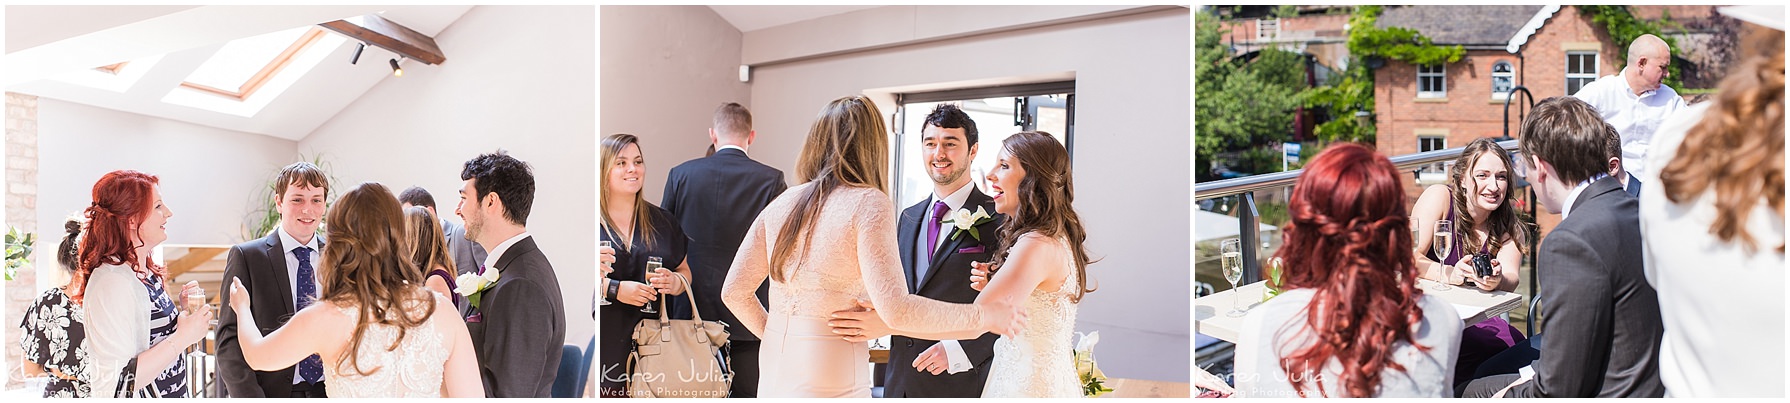 bride and groom greet guests during wedding day drinks reception